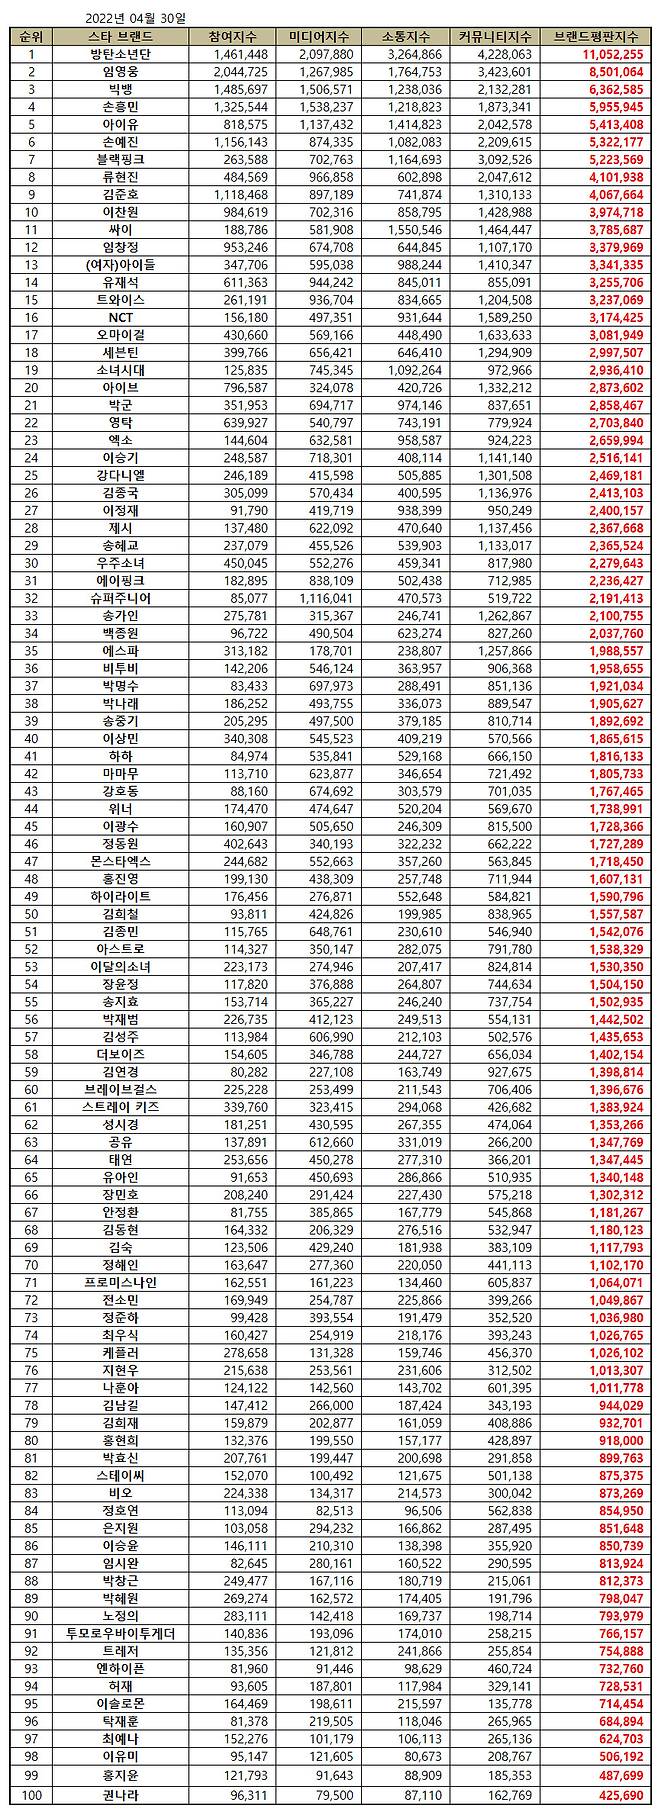 Star Brand Reputation released on April 30, 2022 Big Data analysis showed Lim Young-woong ranked second; first was BTS.The Lim Young-woong brand was analyzed as JiSoo 8,501,064 as the participating JiSoo 2,044,725 media JiSoo 1,267,985 communication JiSoo 1,764,753 community JiSoo 3,423,601.Compared with the star brand reputation JiSoo 6,007,831 in March, it rose 41.50%.Brand reputation JiSoo is an indicator created by brand big data analysis by finding out that consumers online habits have a great impact on brand consumption.The analysis of star brand reputation can measure the relationship with consumers, positive evaluation, media interest, and interest and communication of consumers.The star brand reputation analysis is based on the analysis of the relationship with consumers through big data reputation algorithms targeting brands in the top rank of brand reputation, which are analyzed by entertainers, singer, trot singer, drama actor, movie actor, boy group, girl group, and sports person.The star brand reputation JiSoo included a recommendation JiSoo as a weight.